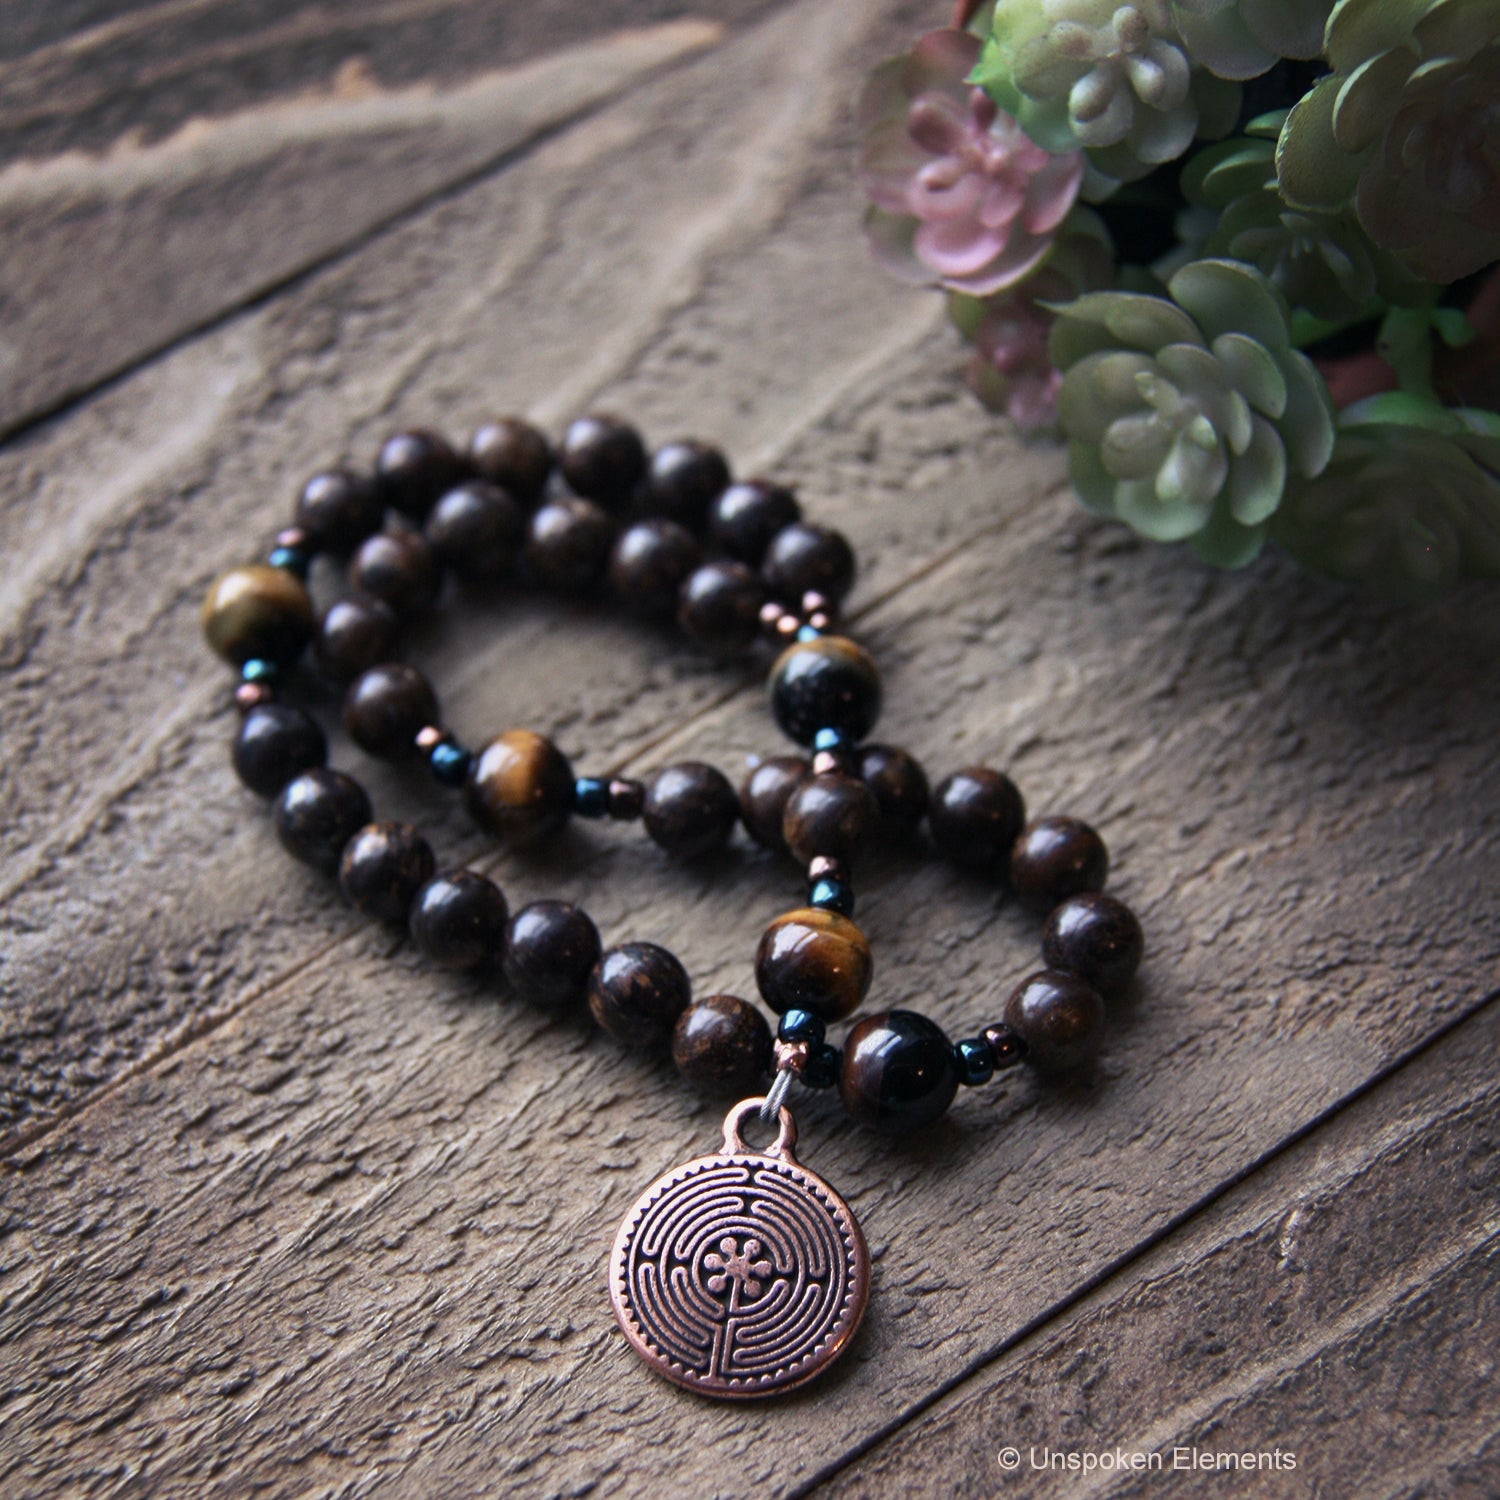 Labyrinth Anglican Prayer Beads by Unspoken Elements